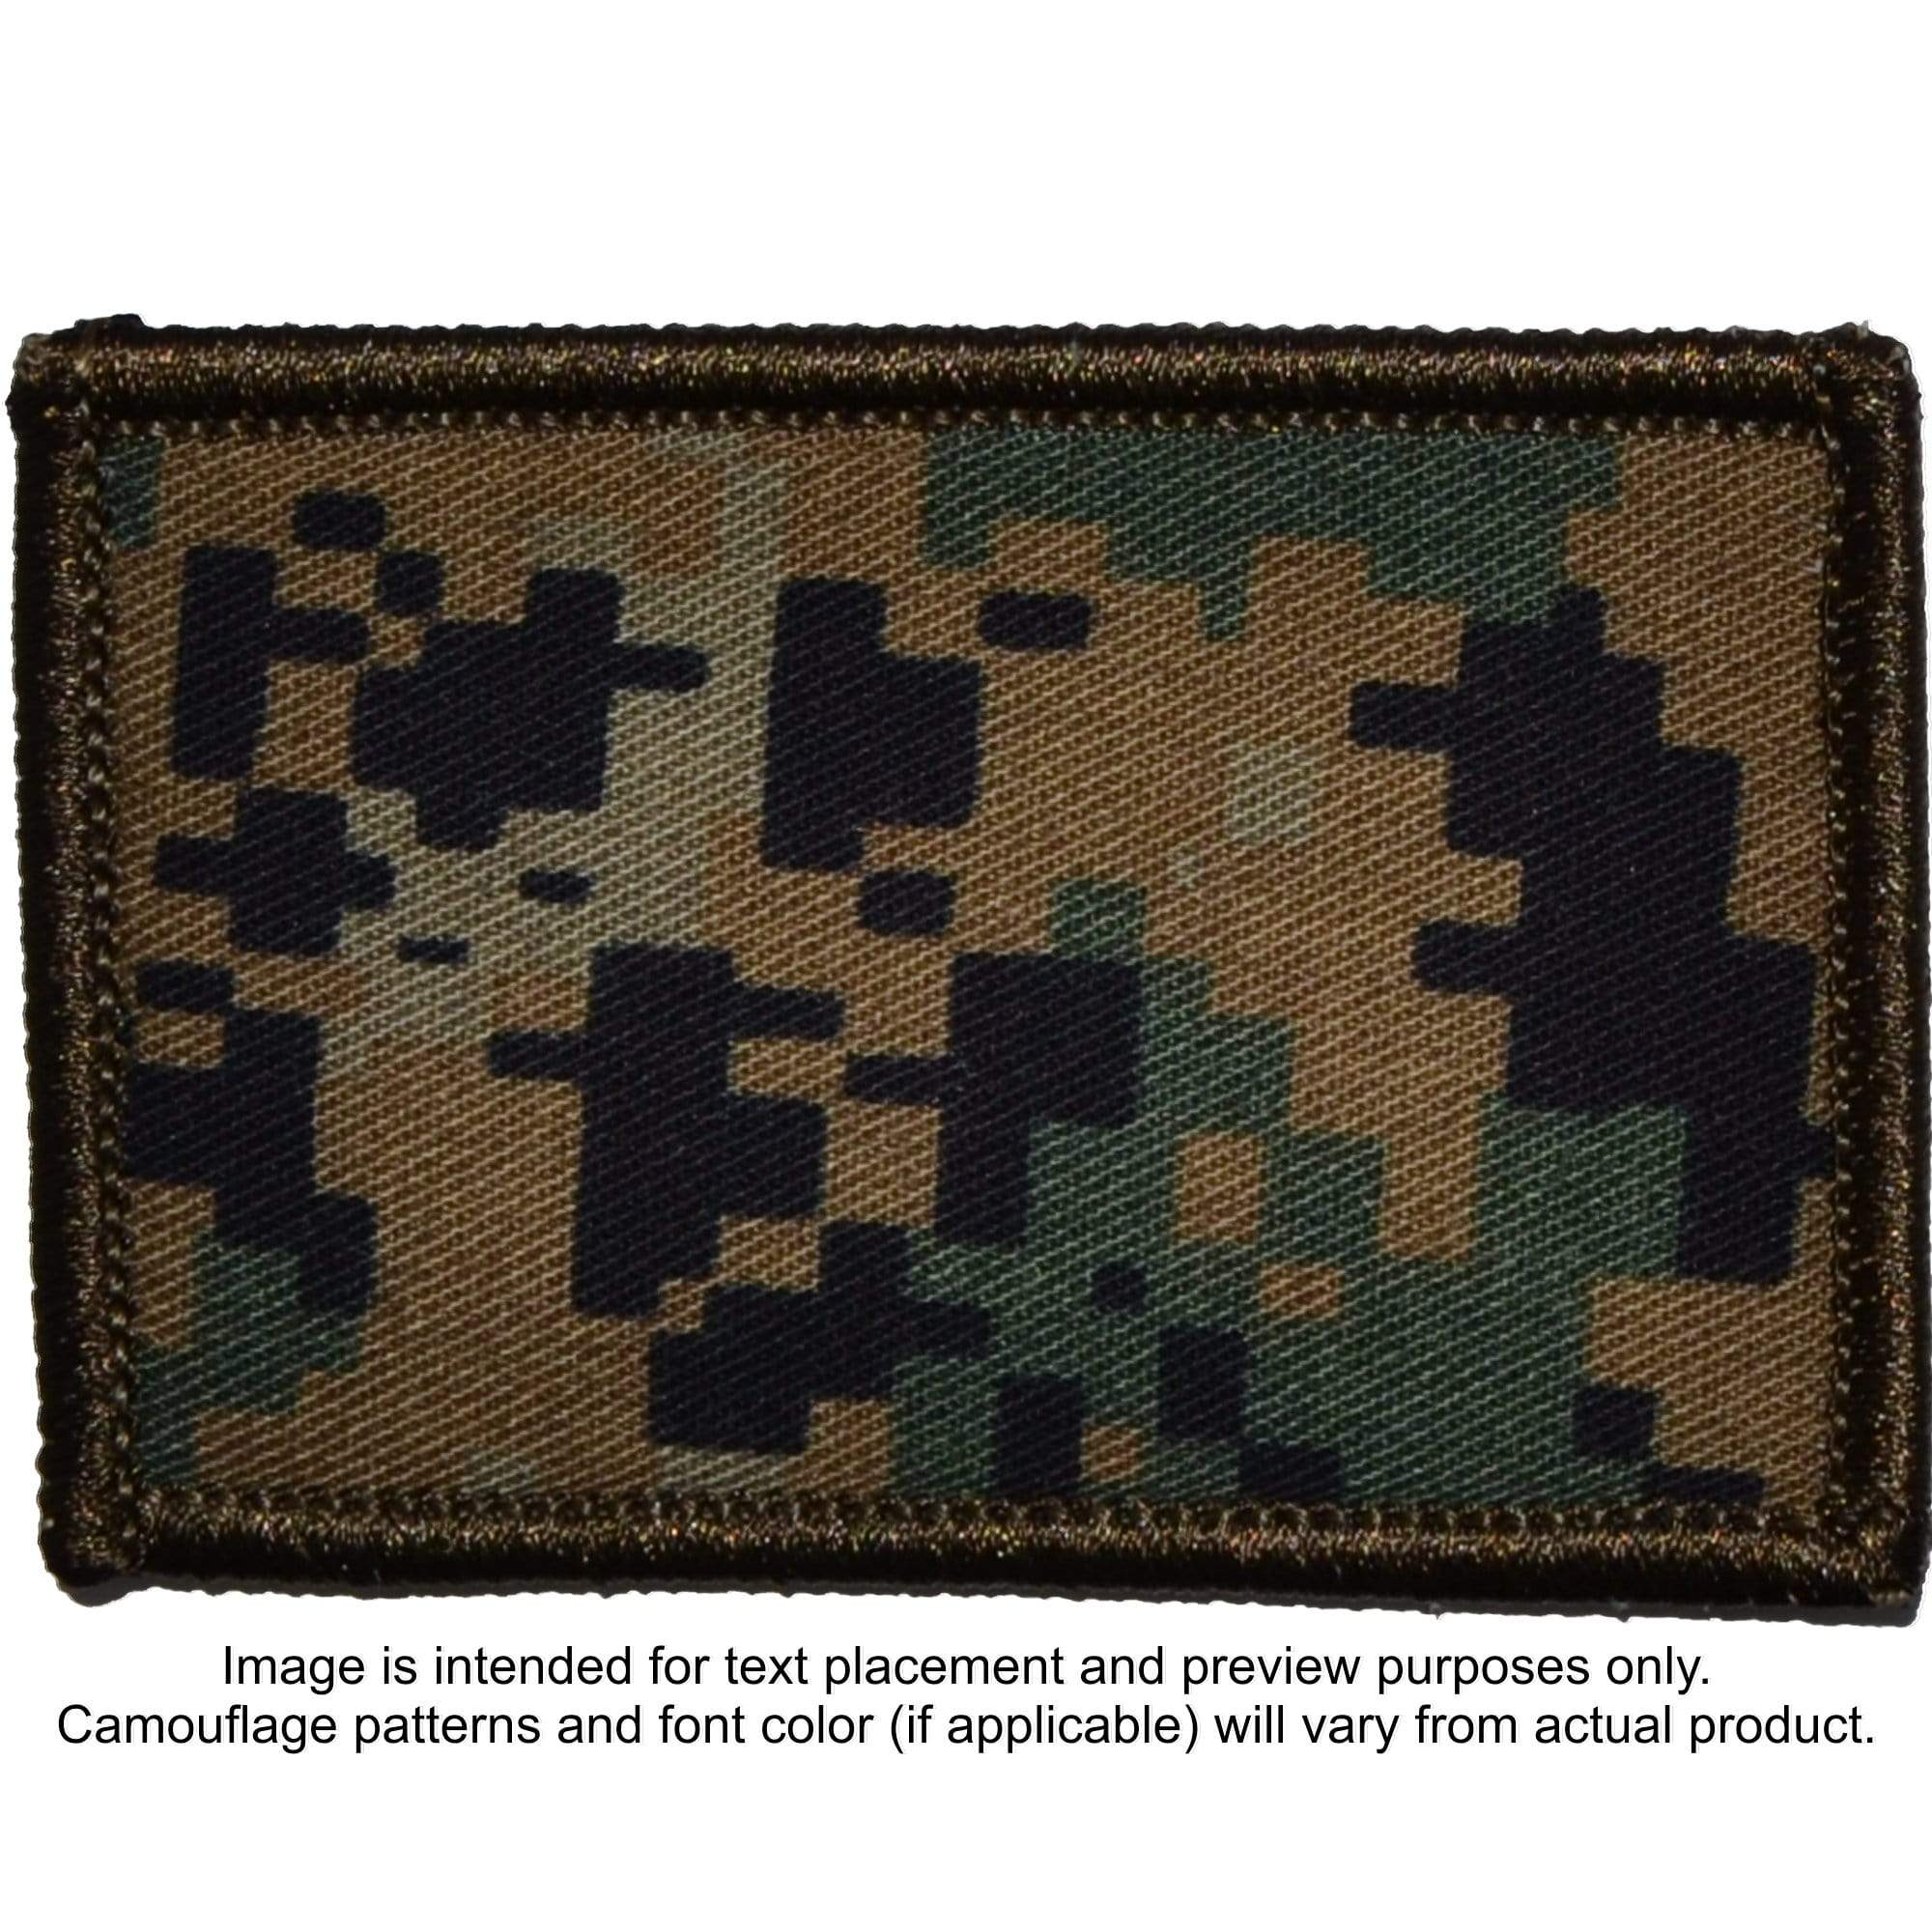 This is Fine Military Patch – Fair Use Patches